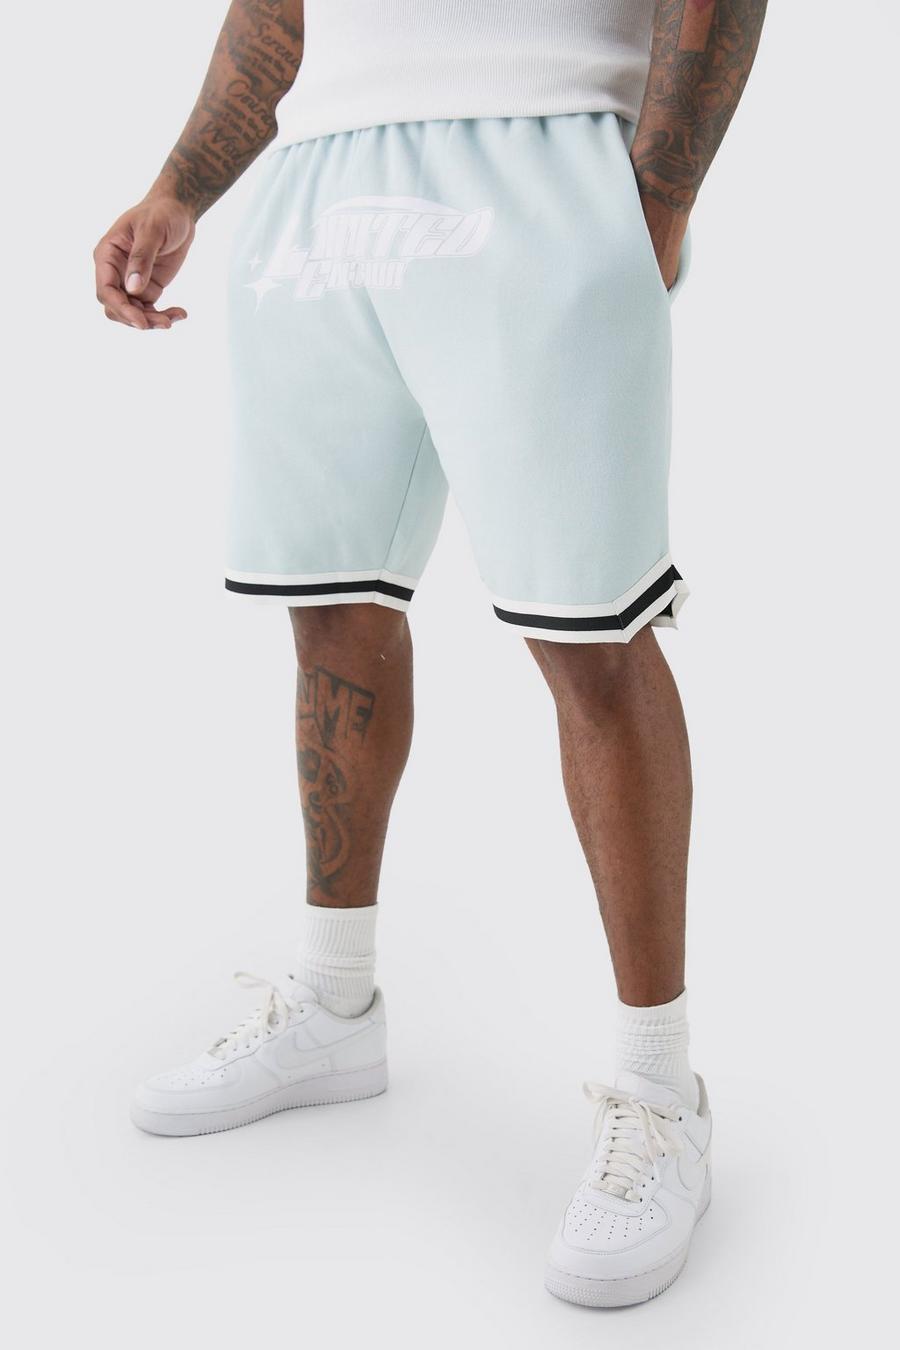 Plus Loose Fit Limited Basketball Short In Light Blue